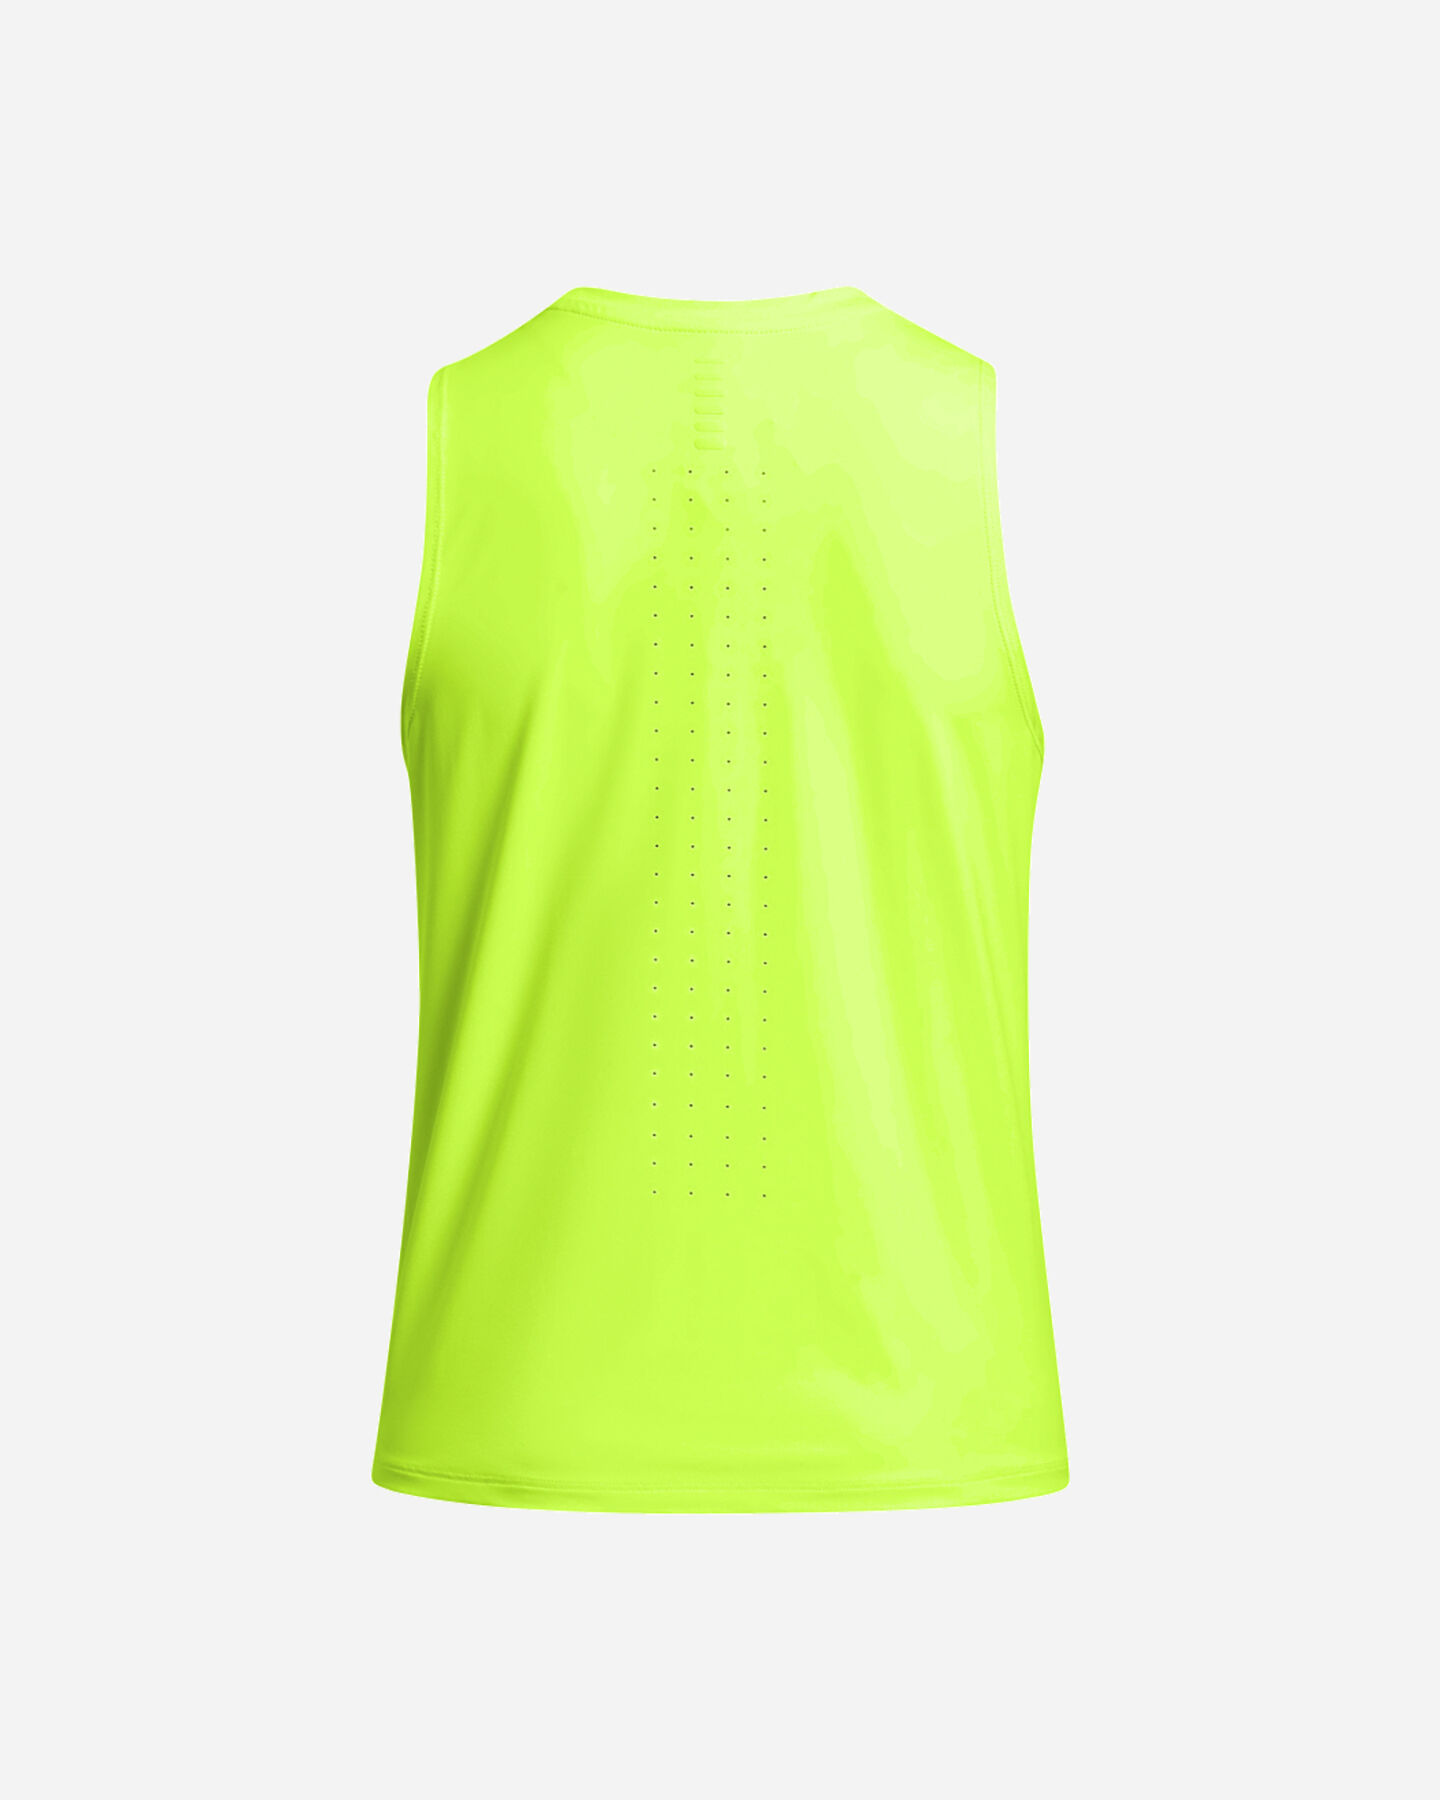  Canotta running UNDER ARMOUR LAUNCH ELITE W S5641832|0731|XS scatto 1